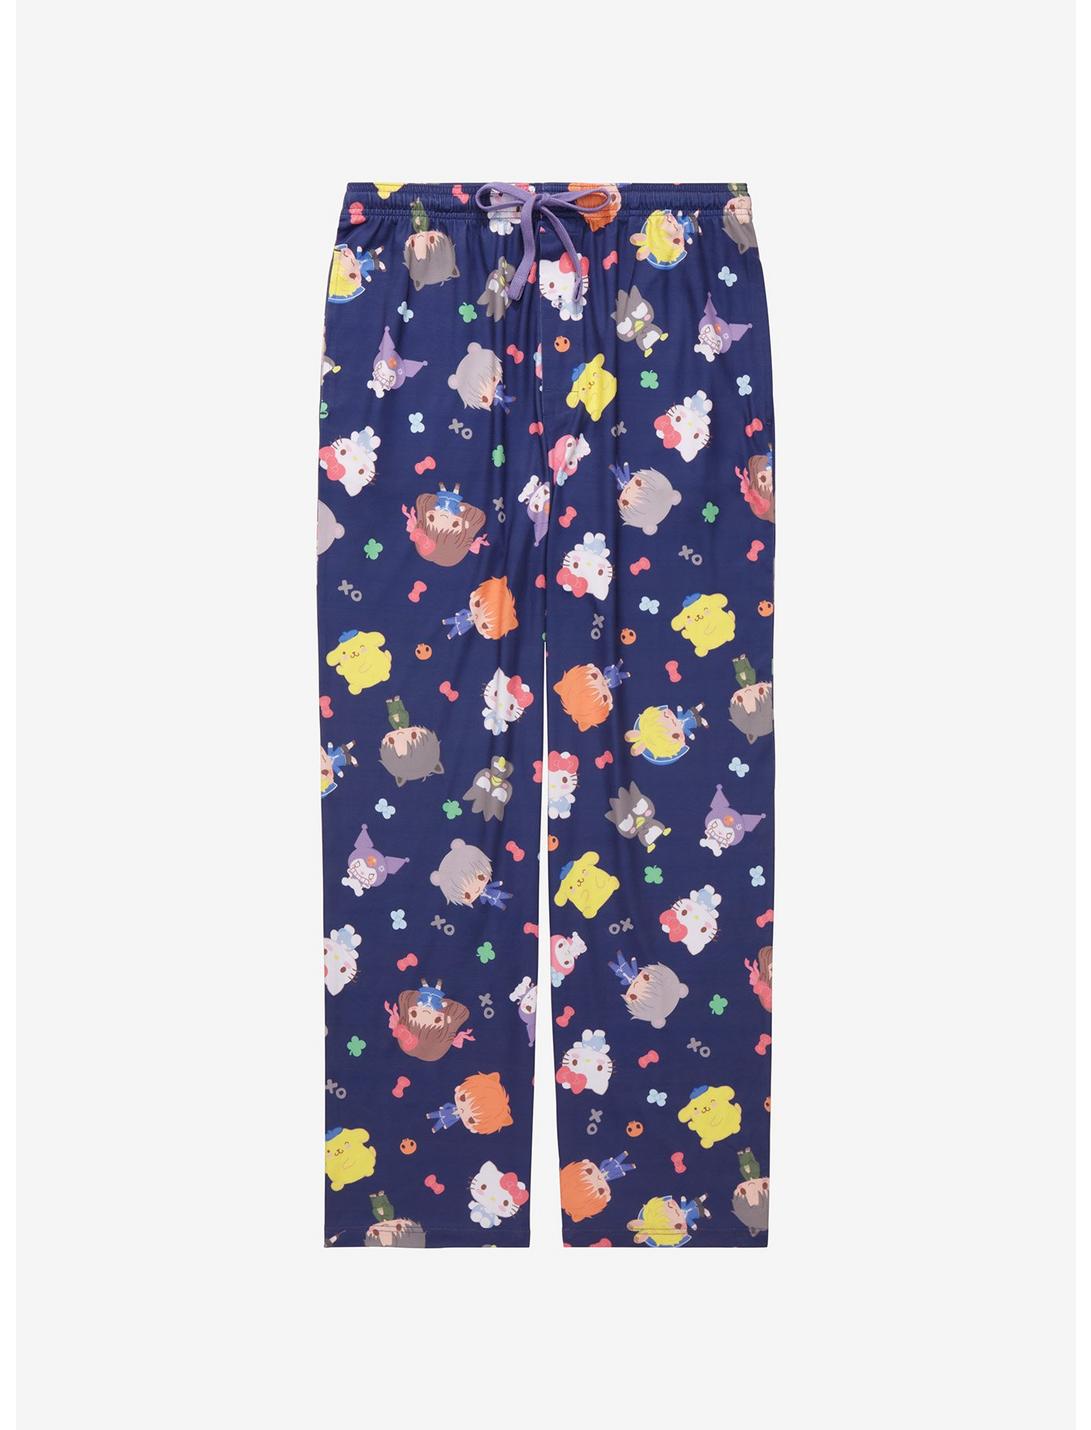 Fruits Basket x Hello Kitty and Friends Allover Print Sleep Pants - BoxLunch Exclusive, BLUE, hi-res